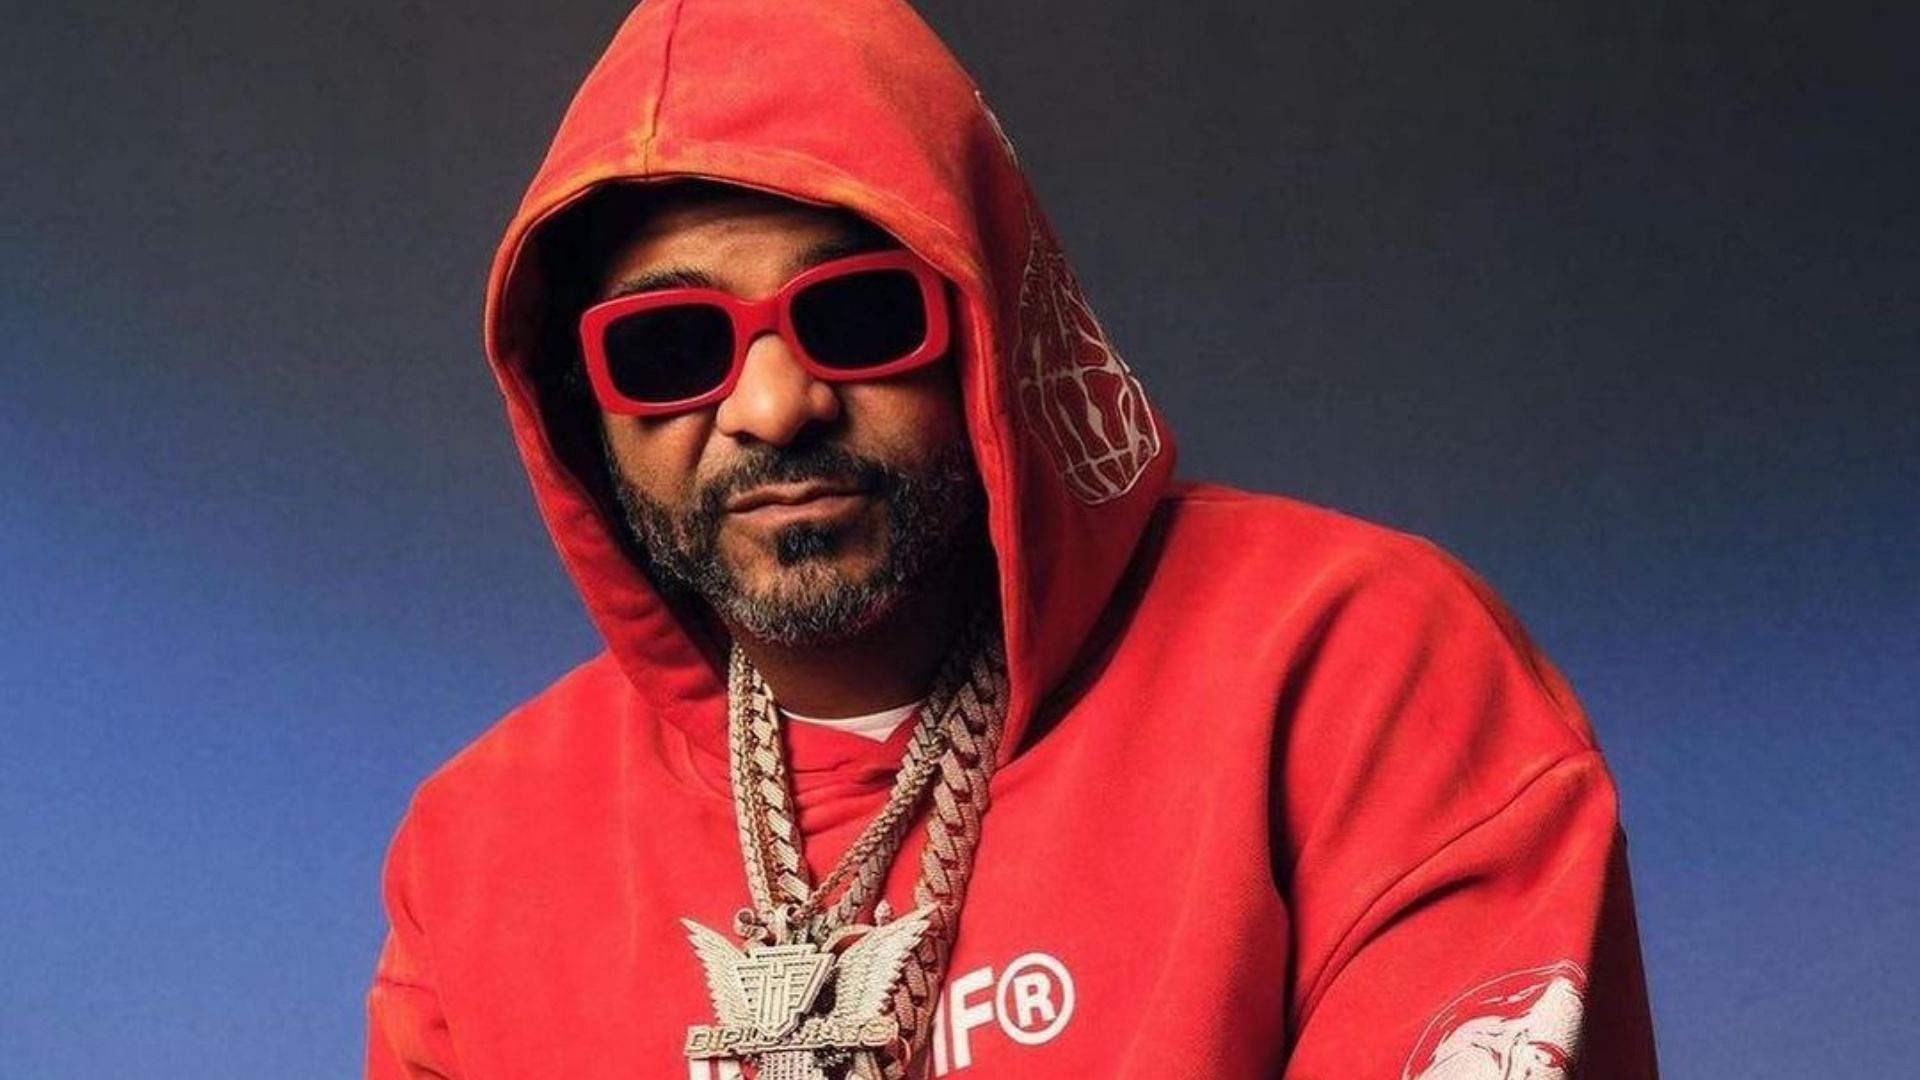 Who is Jim Jones? Meet the rapper ahead of his appearance on Family